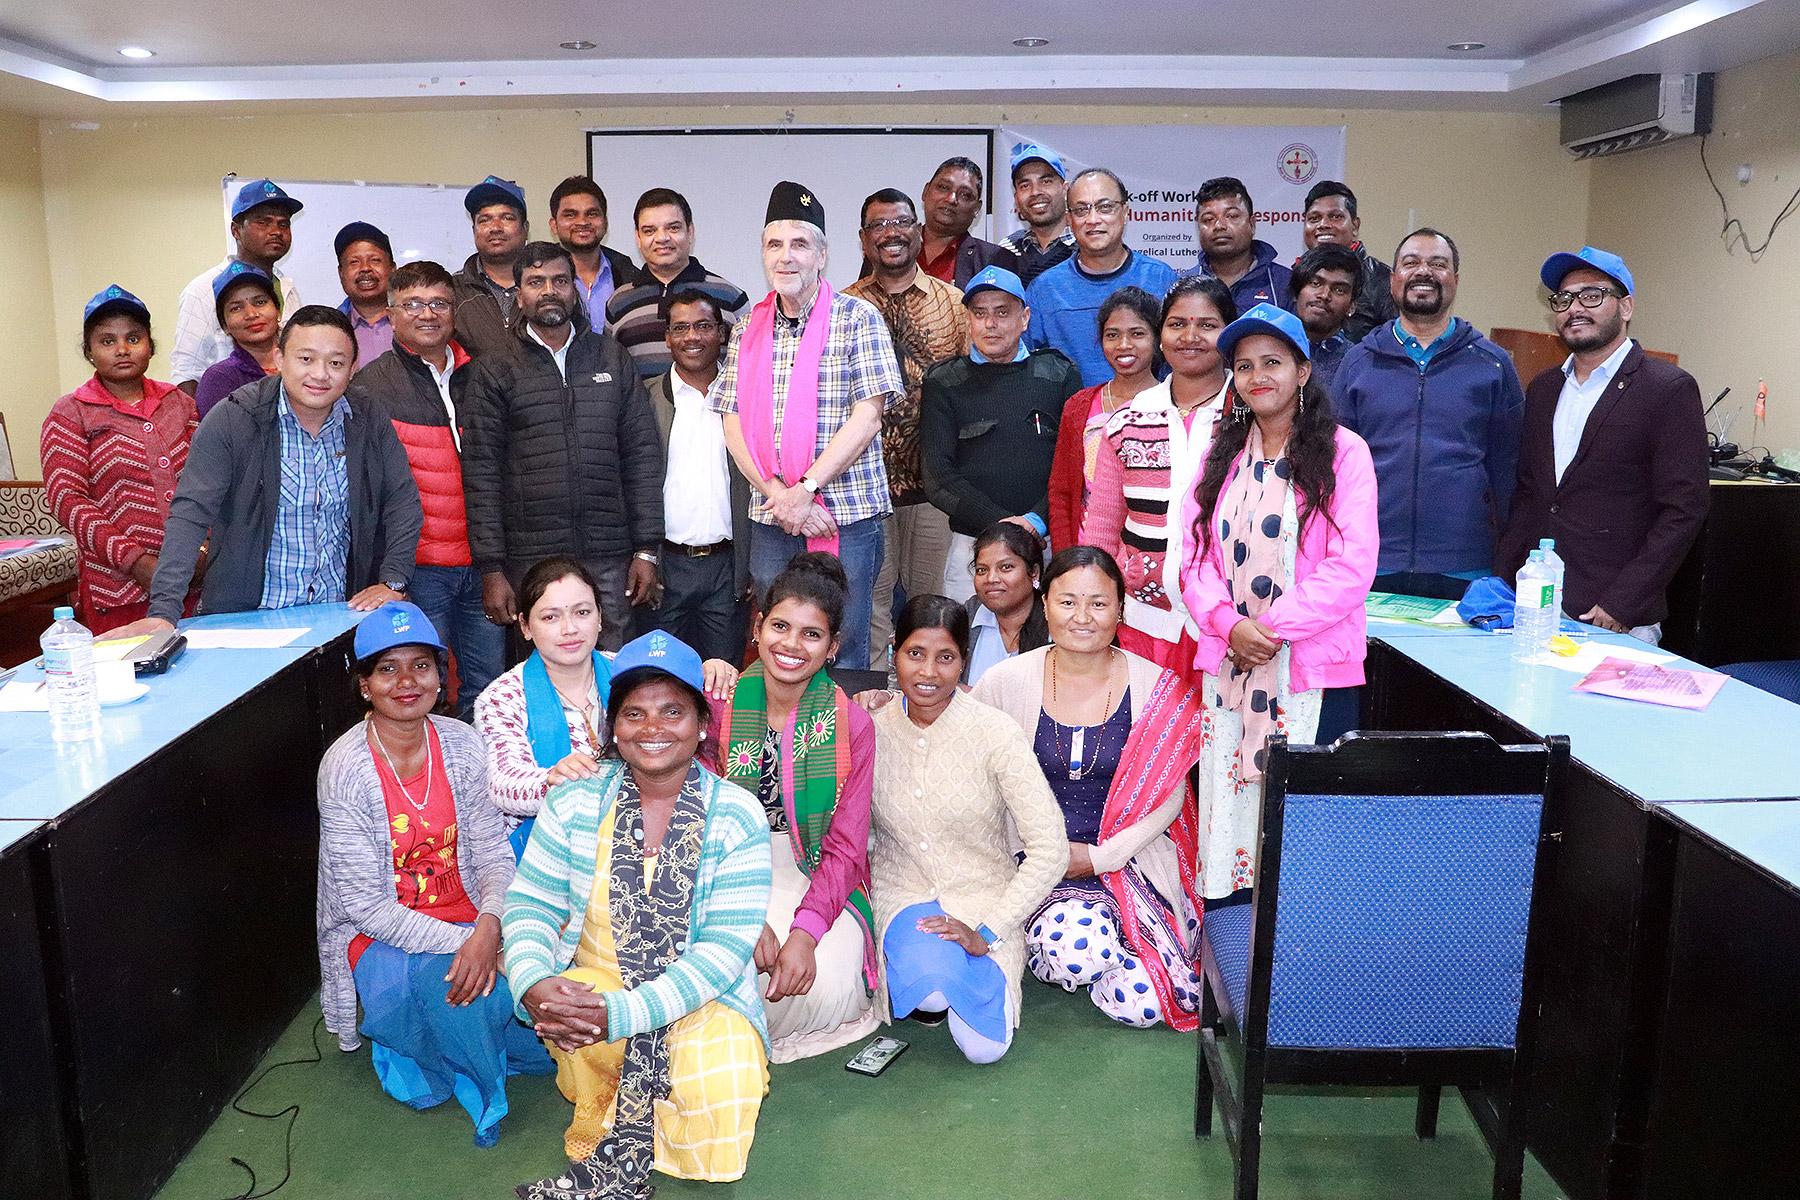  Participants at a workshop in Nepal in December 2019 develop ideas on how to pilot the âChurches and Emergenciesâ program in the two target communities. Photo: LWF/NELC